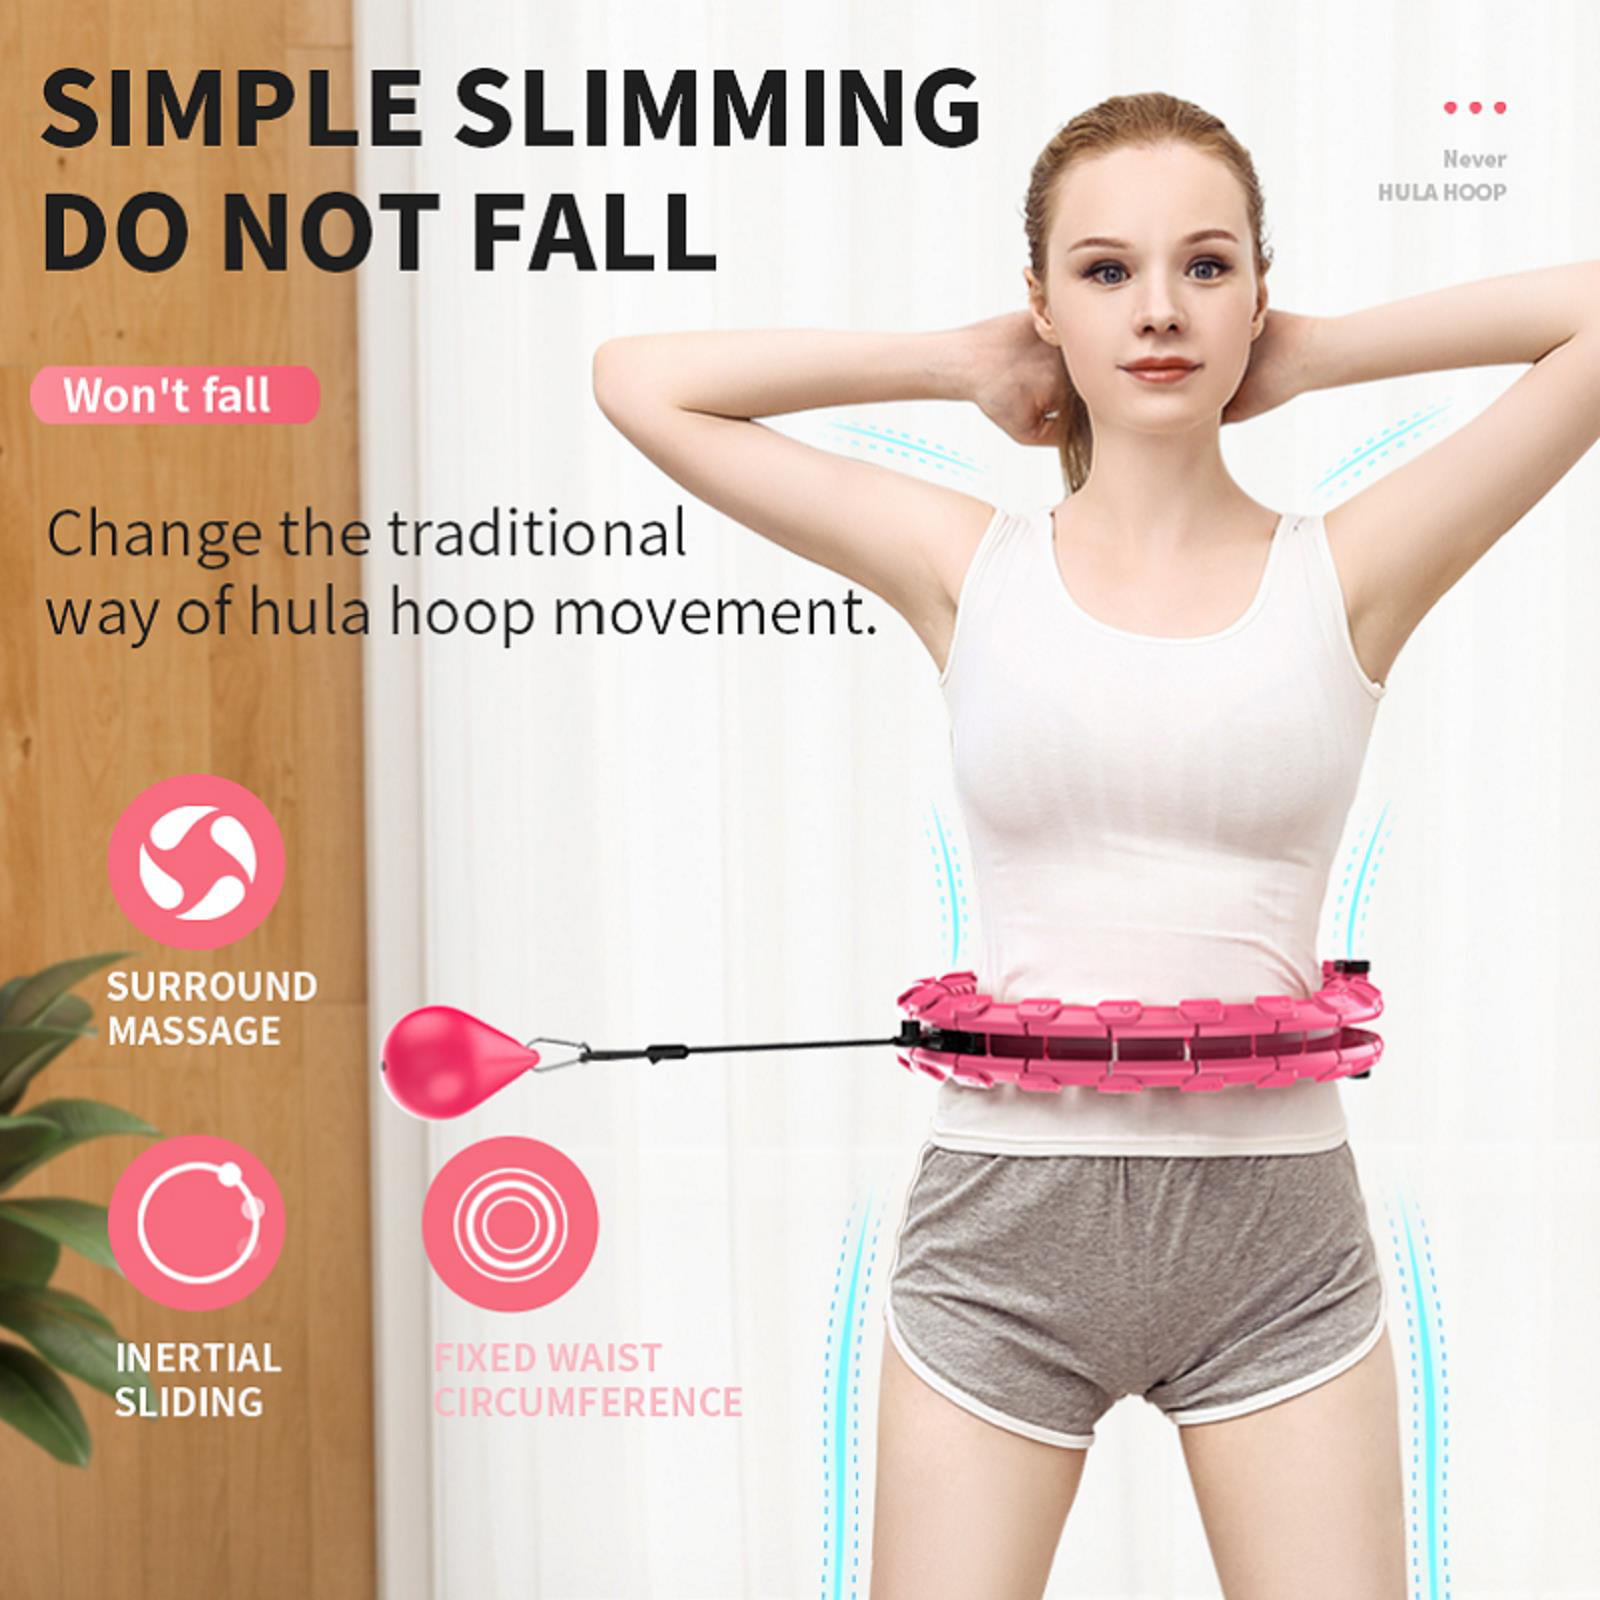 UJoyFeel Weighted Hula Hoops Smart Fitness Hoops for Adults Weight Loss 24 Detachable Knots Plus 4 Extra Sections Adjustable Hula Hoop 2 in 1 Abdomen Fitness Message Non Fall Auto Spinning Ball 